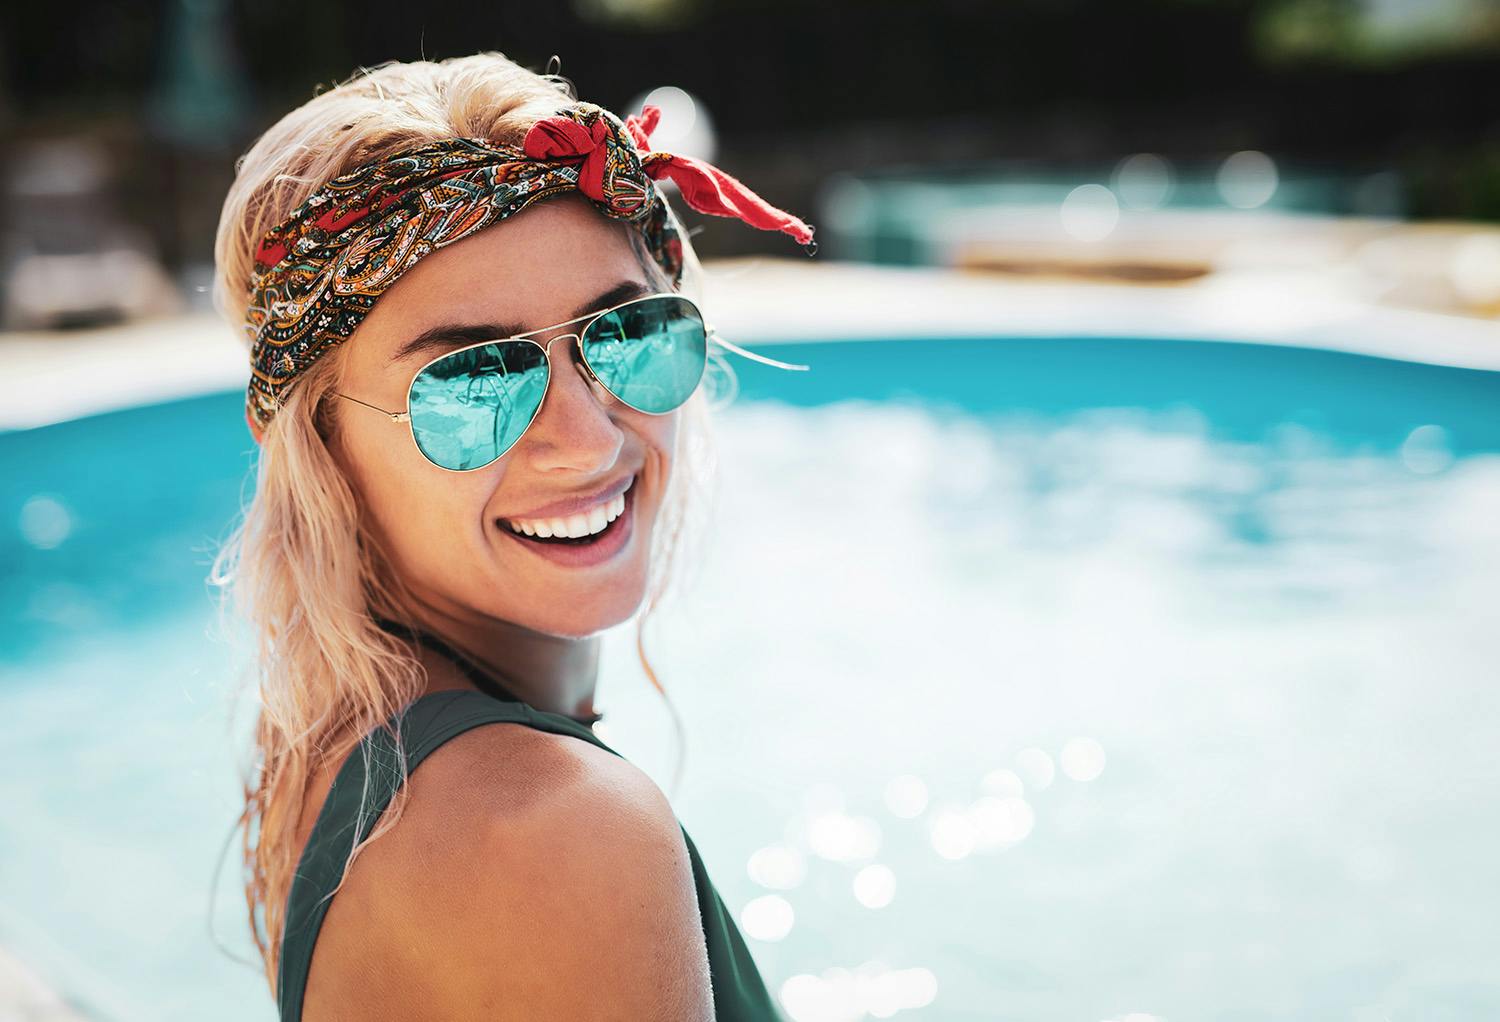 Woman with Sunglasses and a Bandana Sitting by the Pool